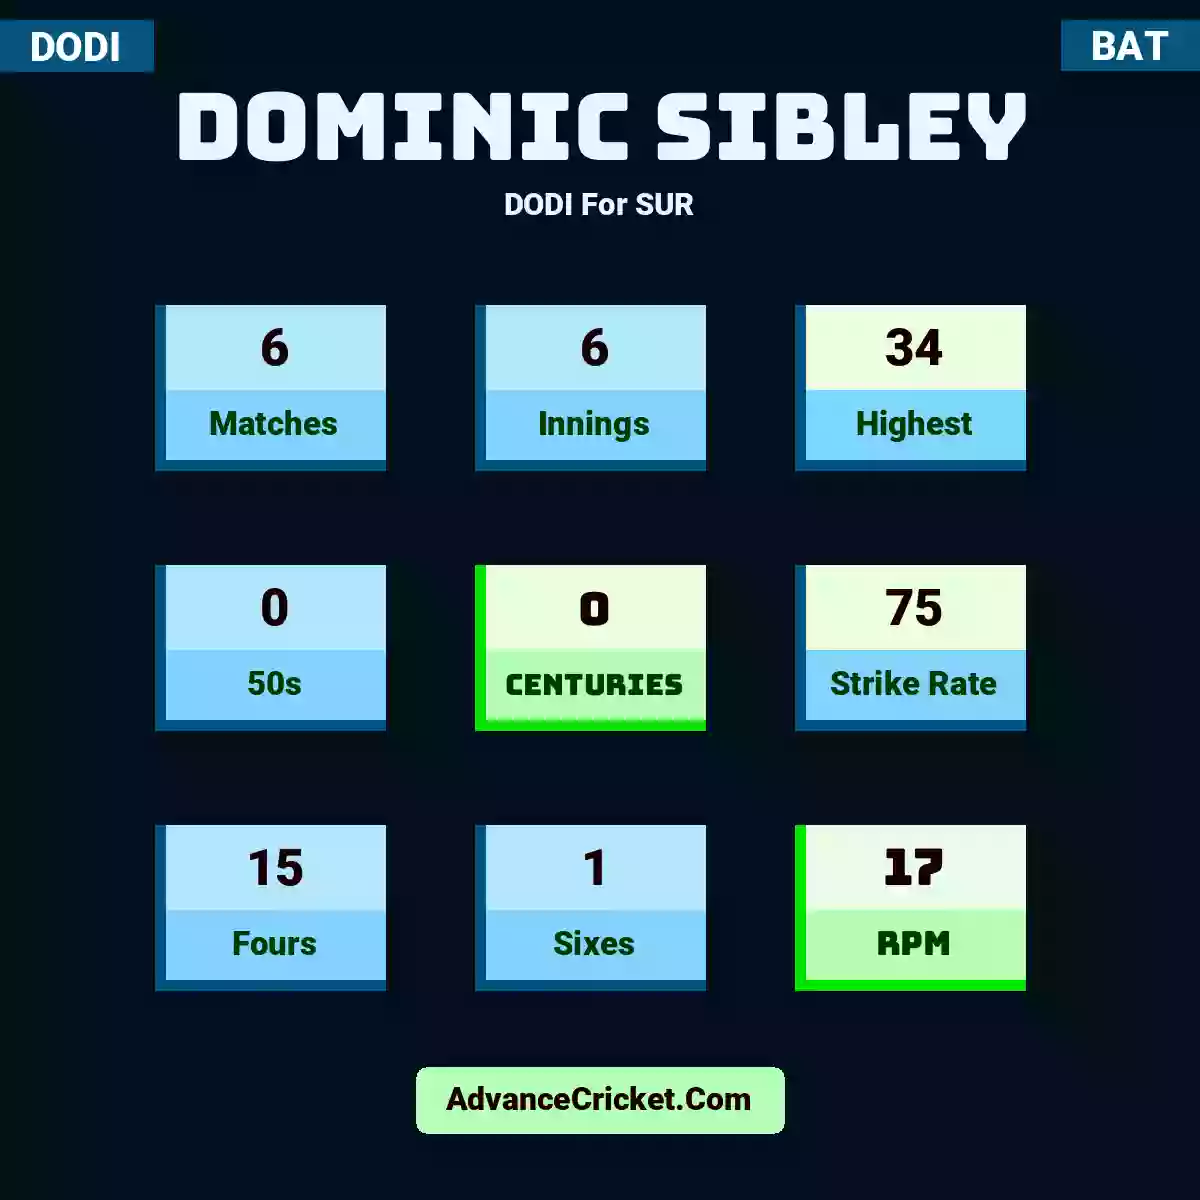 Dominic Sibley DODI  For SUR, Dominic Sibley played 6 matches, scored 34 runs as highest, 0 half-centuries, and 0 centuries, with a strike rate of 75. D.Sibley hit 15 fours and 1 sixes, with an RPM of 17.